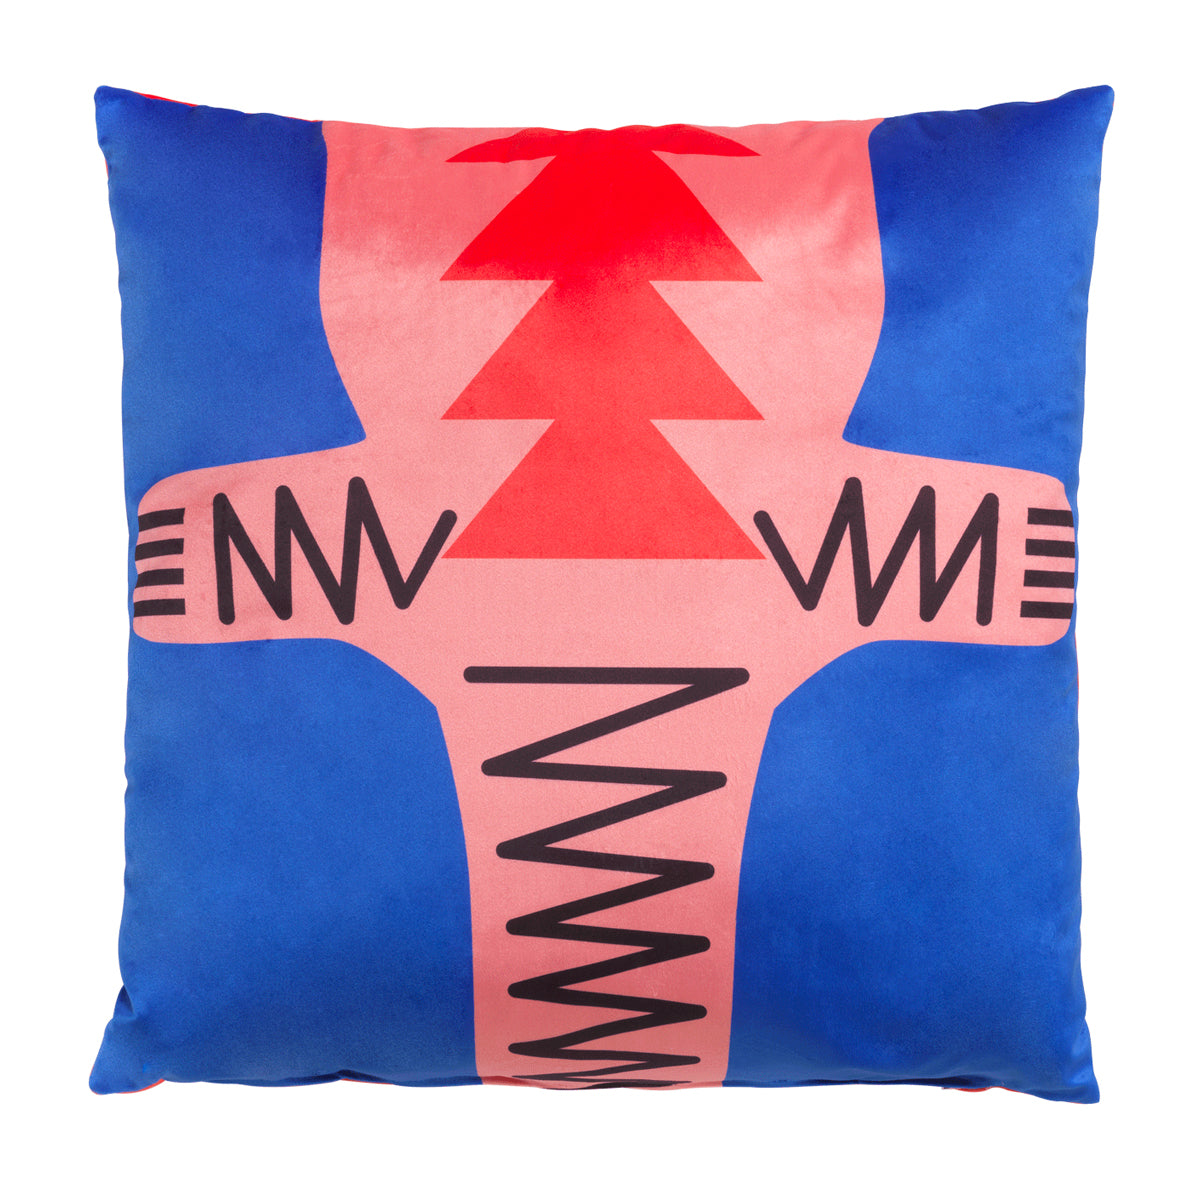 Oggian Crocopink Cushion Cover by Marco Oggian